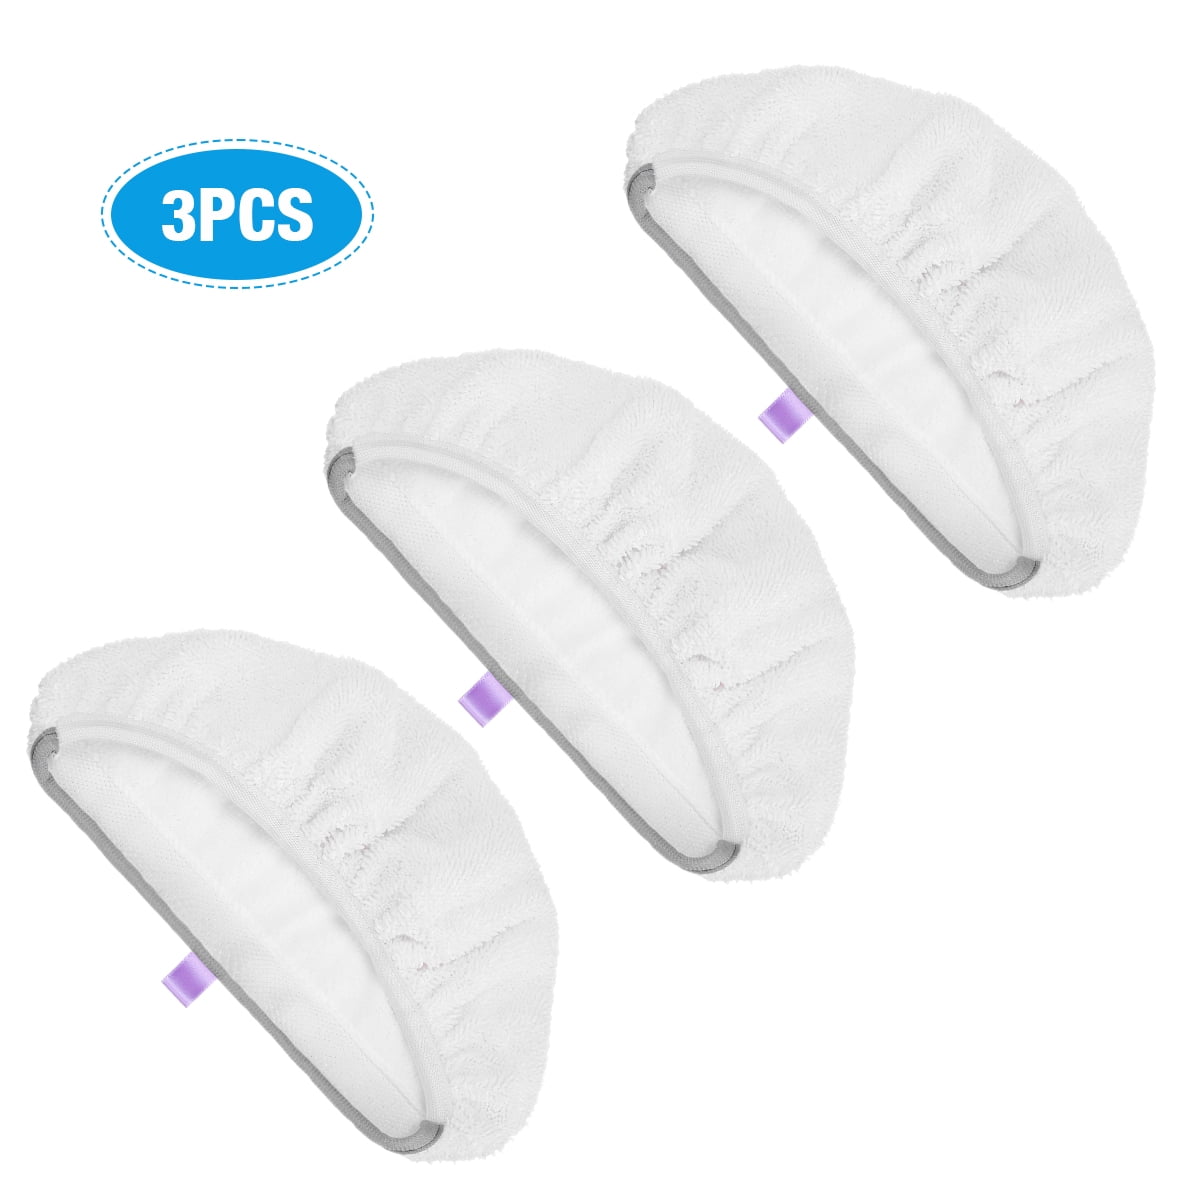 4 Steam Mop Pads fits Bissell PowerFresh Pad 1940 203-2633 19402 19404 19408 